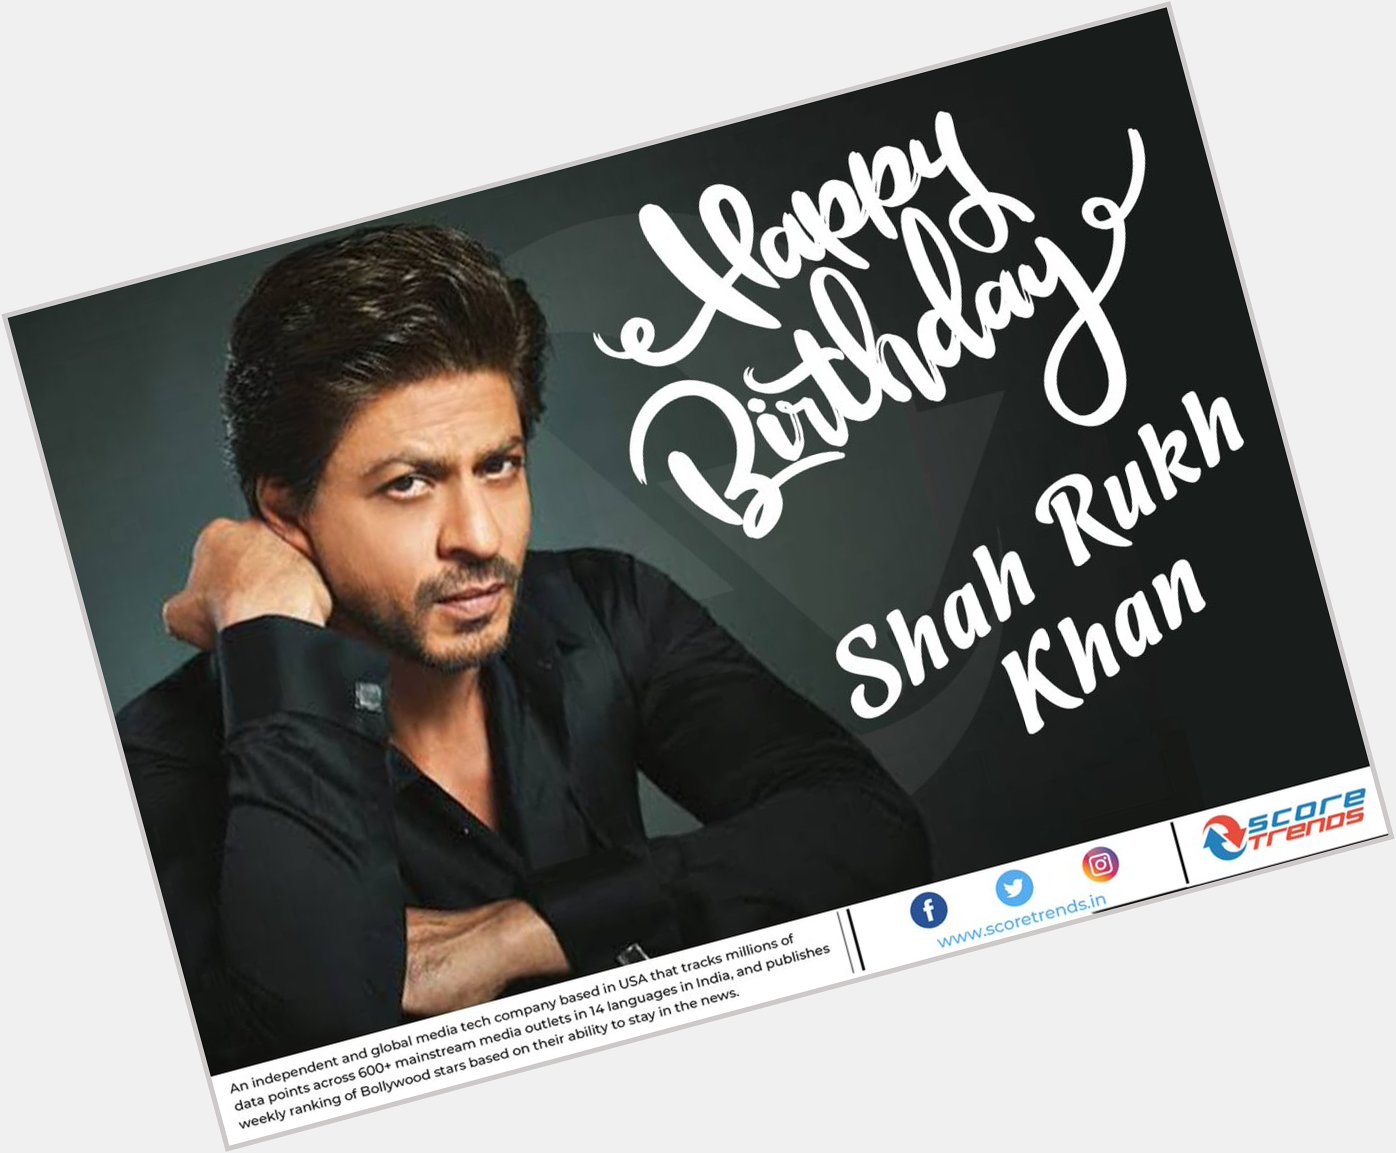 Score Trends wishes Shah Rukh Khan a Happy Birthday!! 